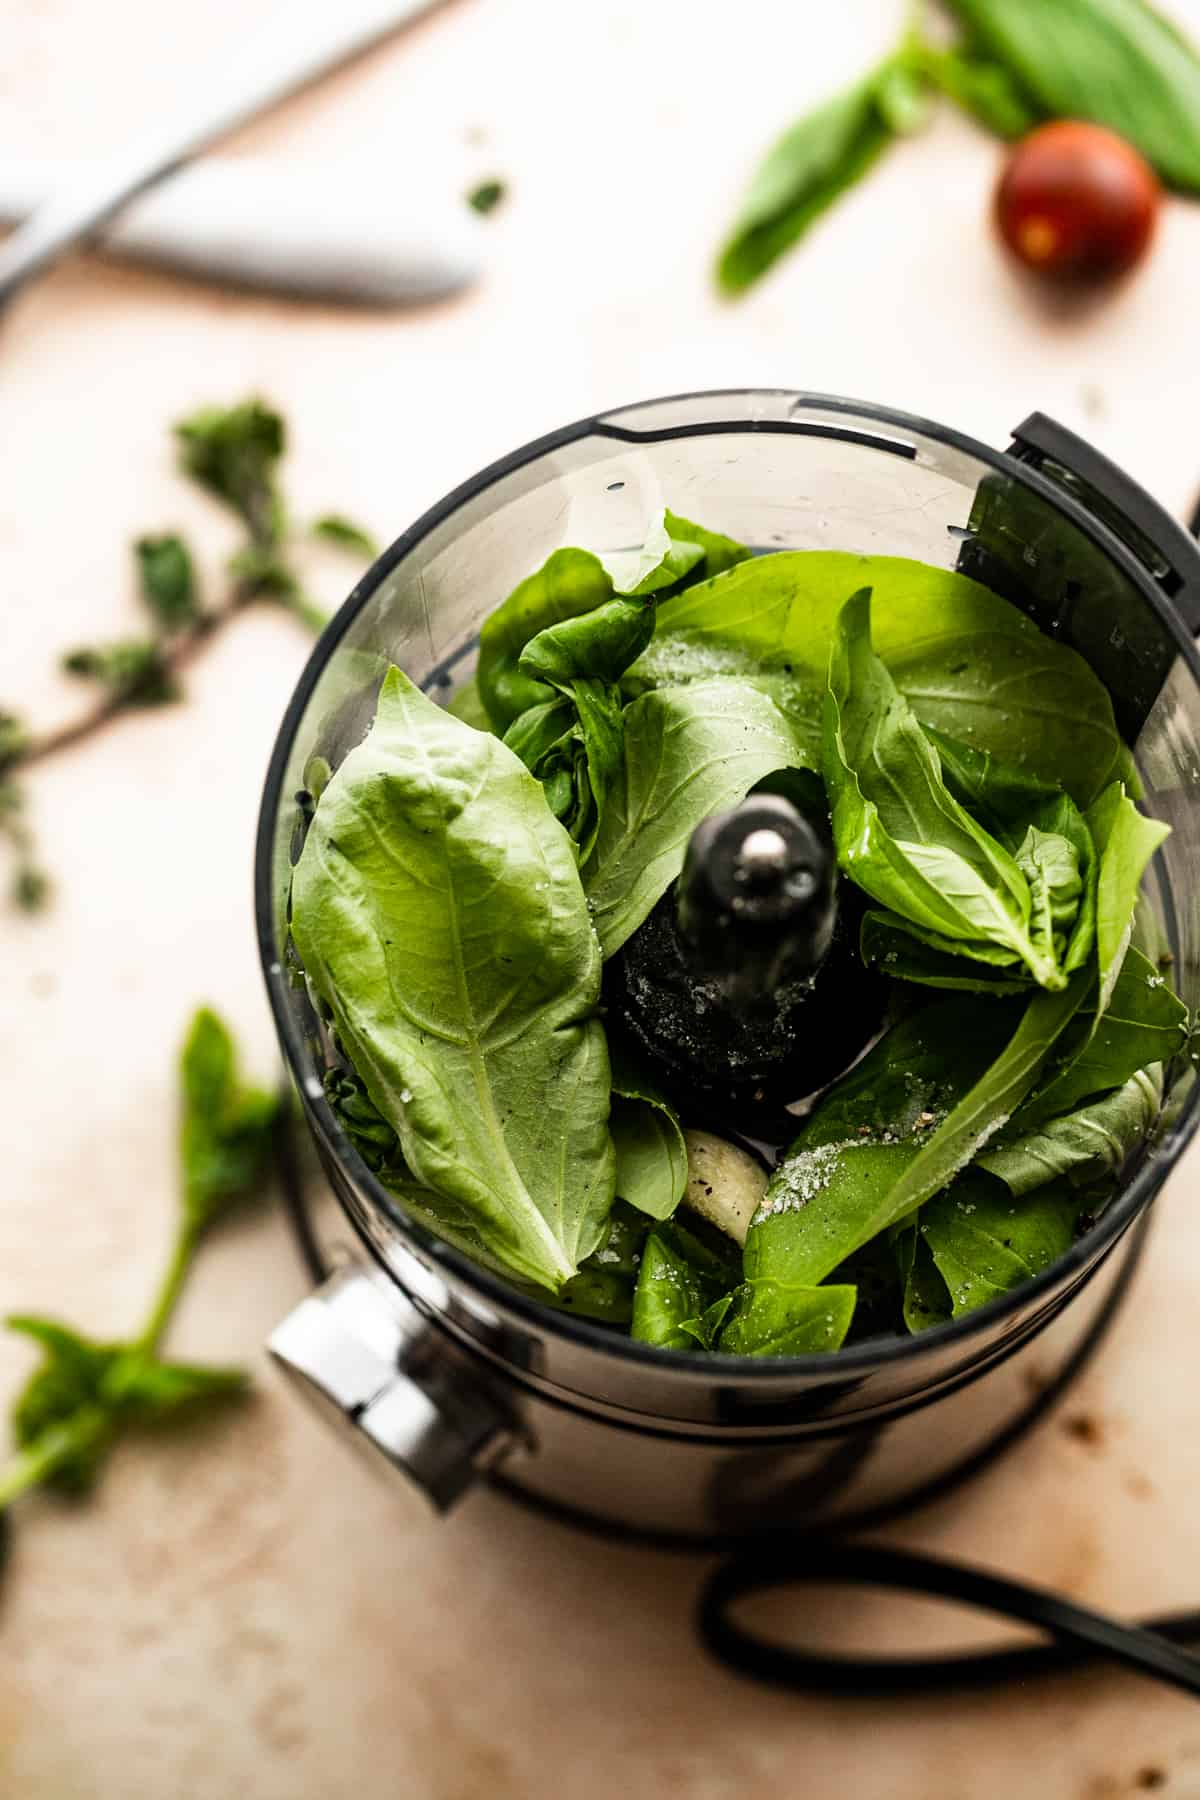 Adding the ingredients for basil garlic dressing to a food processor.